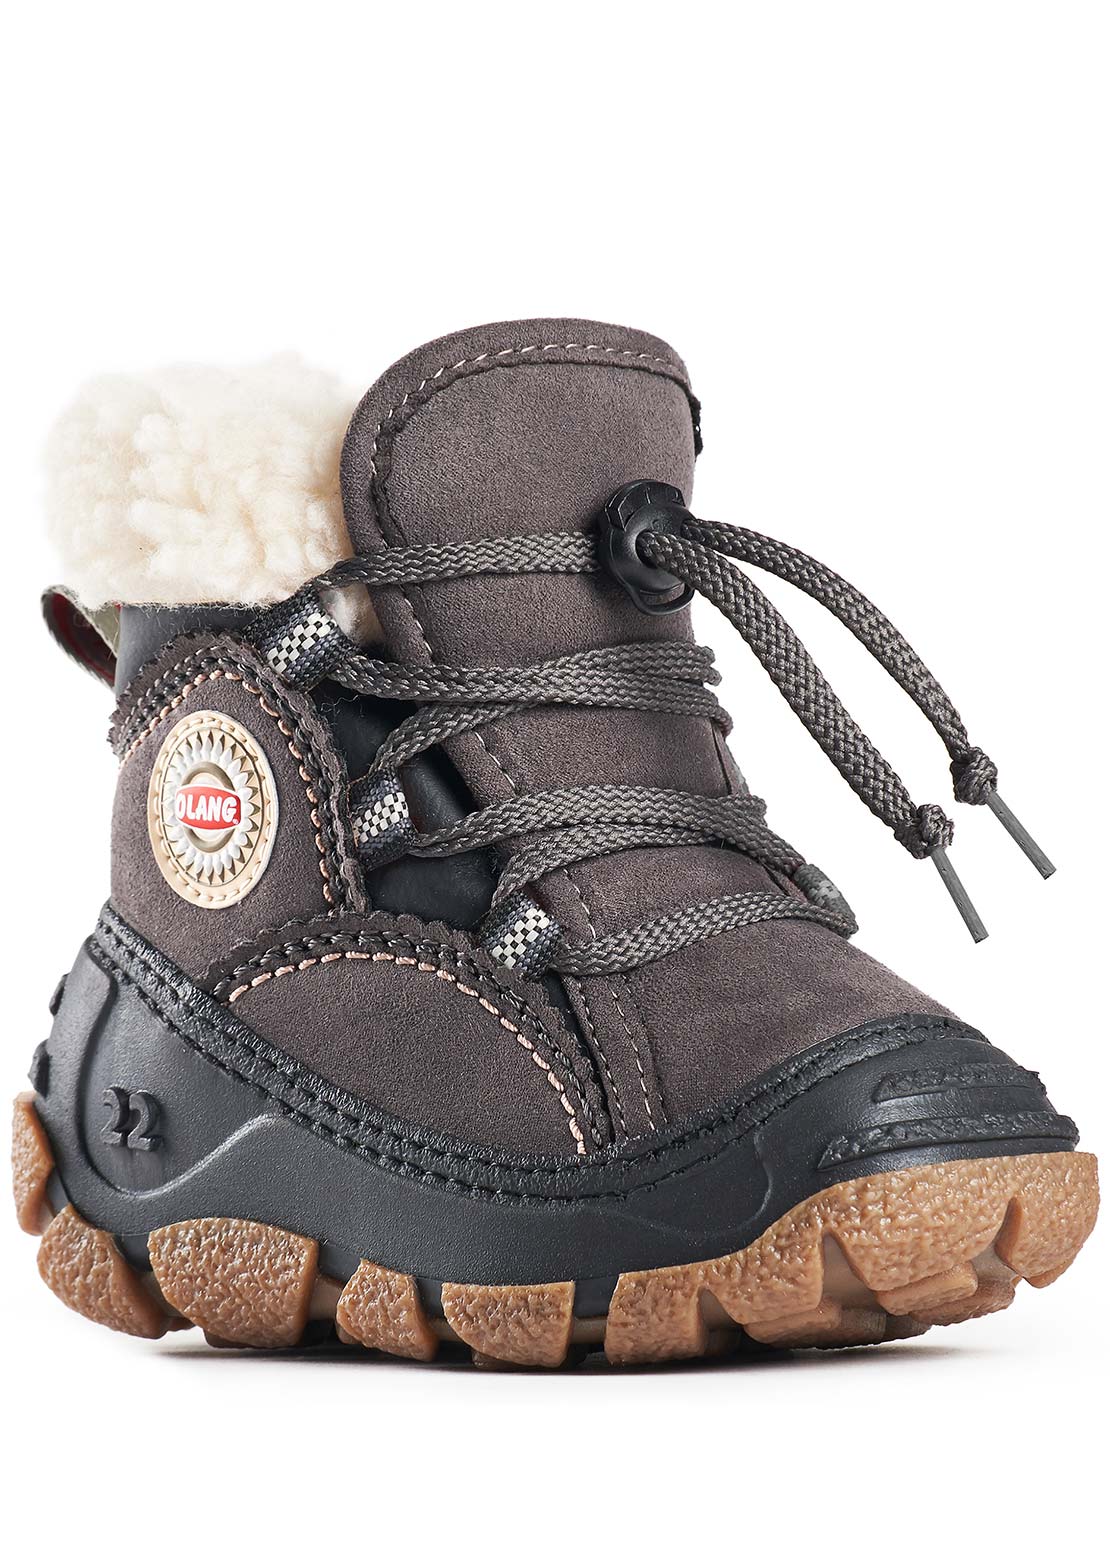 Olang Toddler Randa 2.0 Boots Anthracite